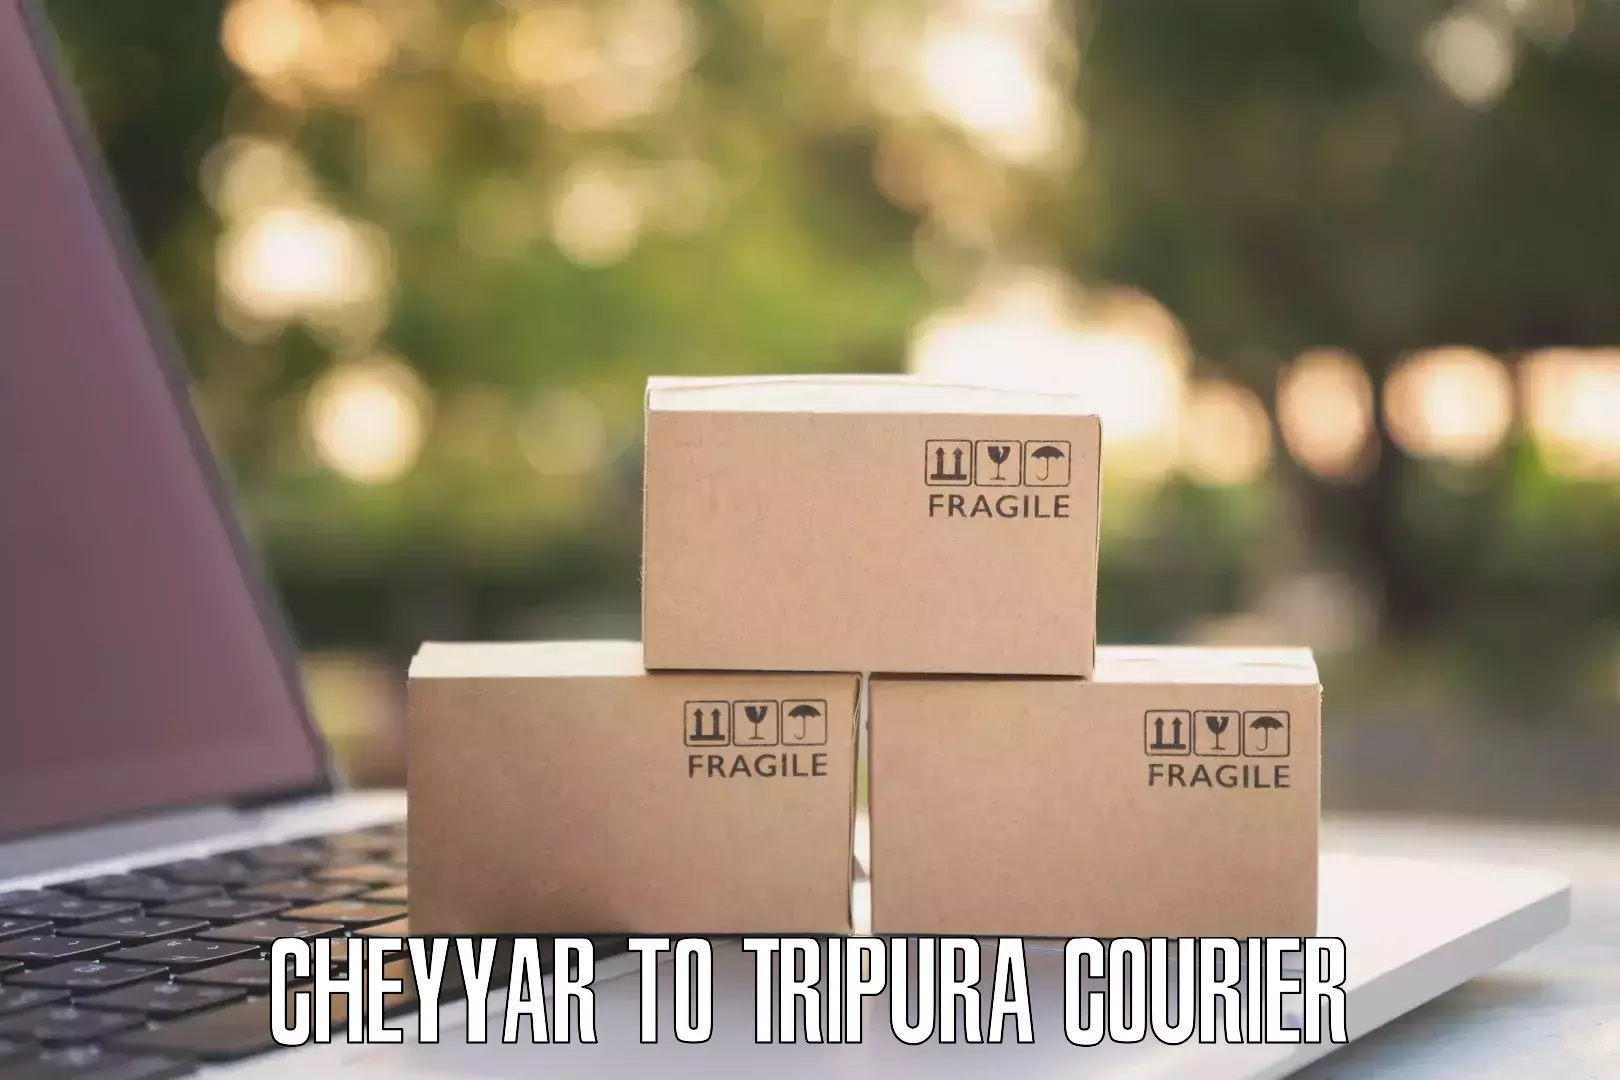 Fast delivery service Cheyyar to Tripura